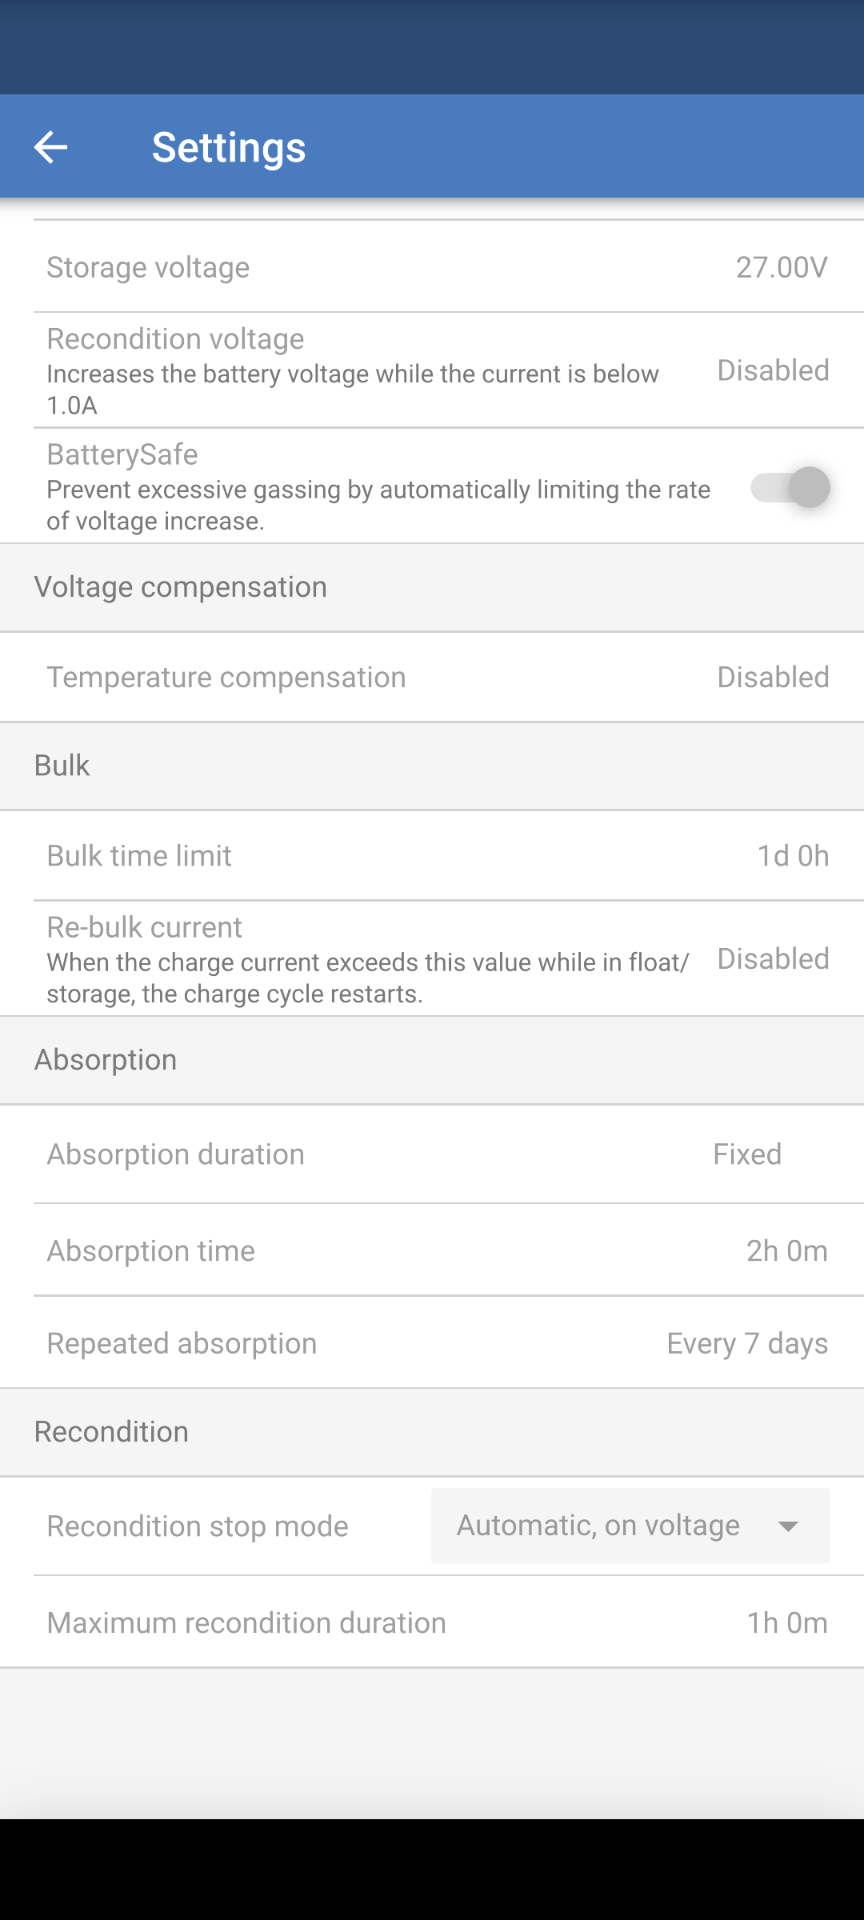 victron-app-charger-setiings-page-2.png